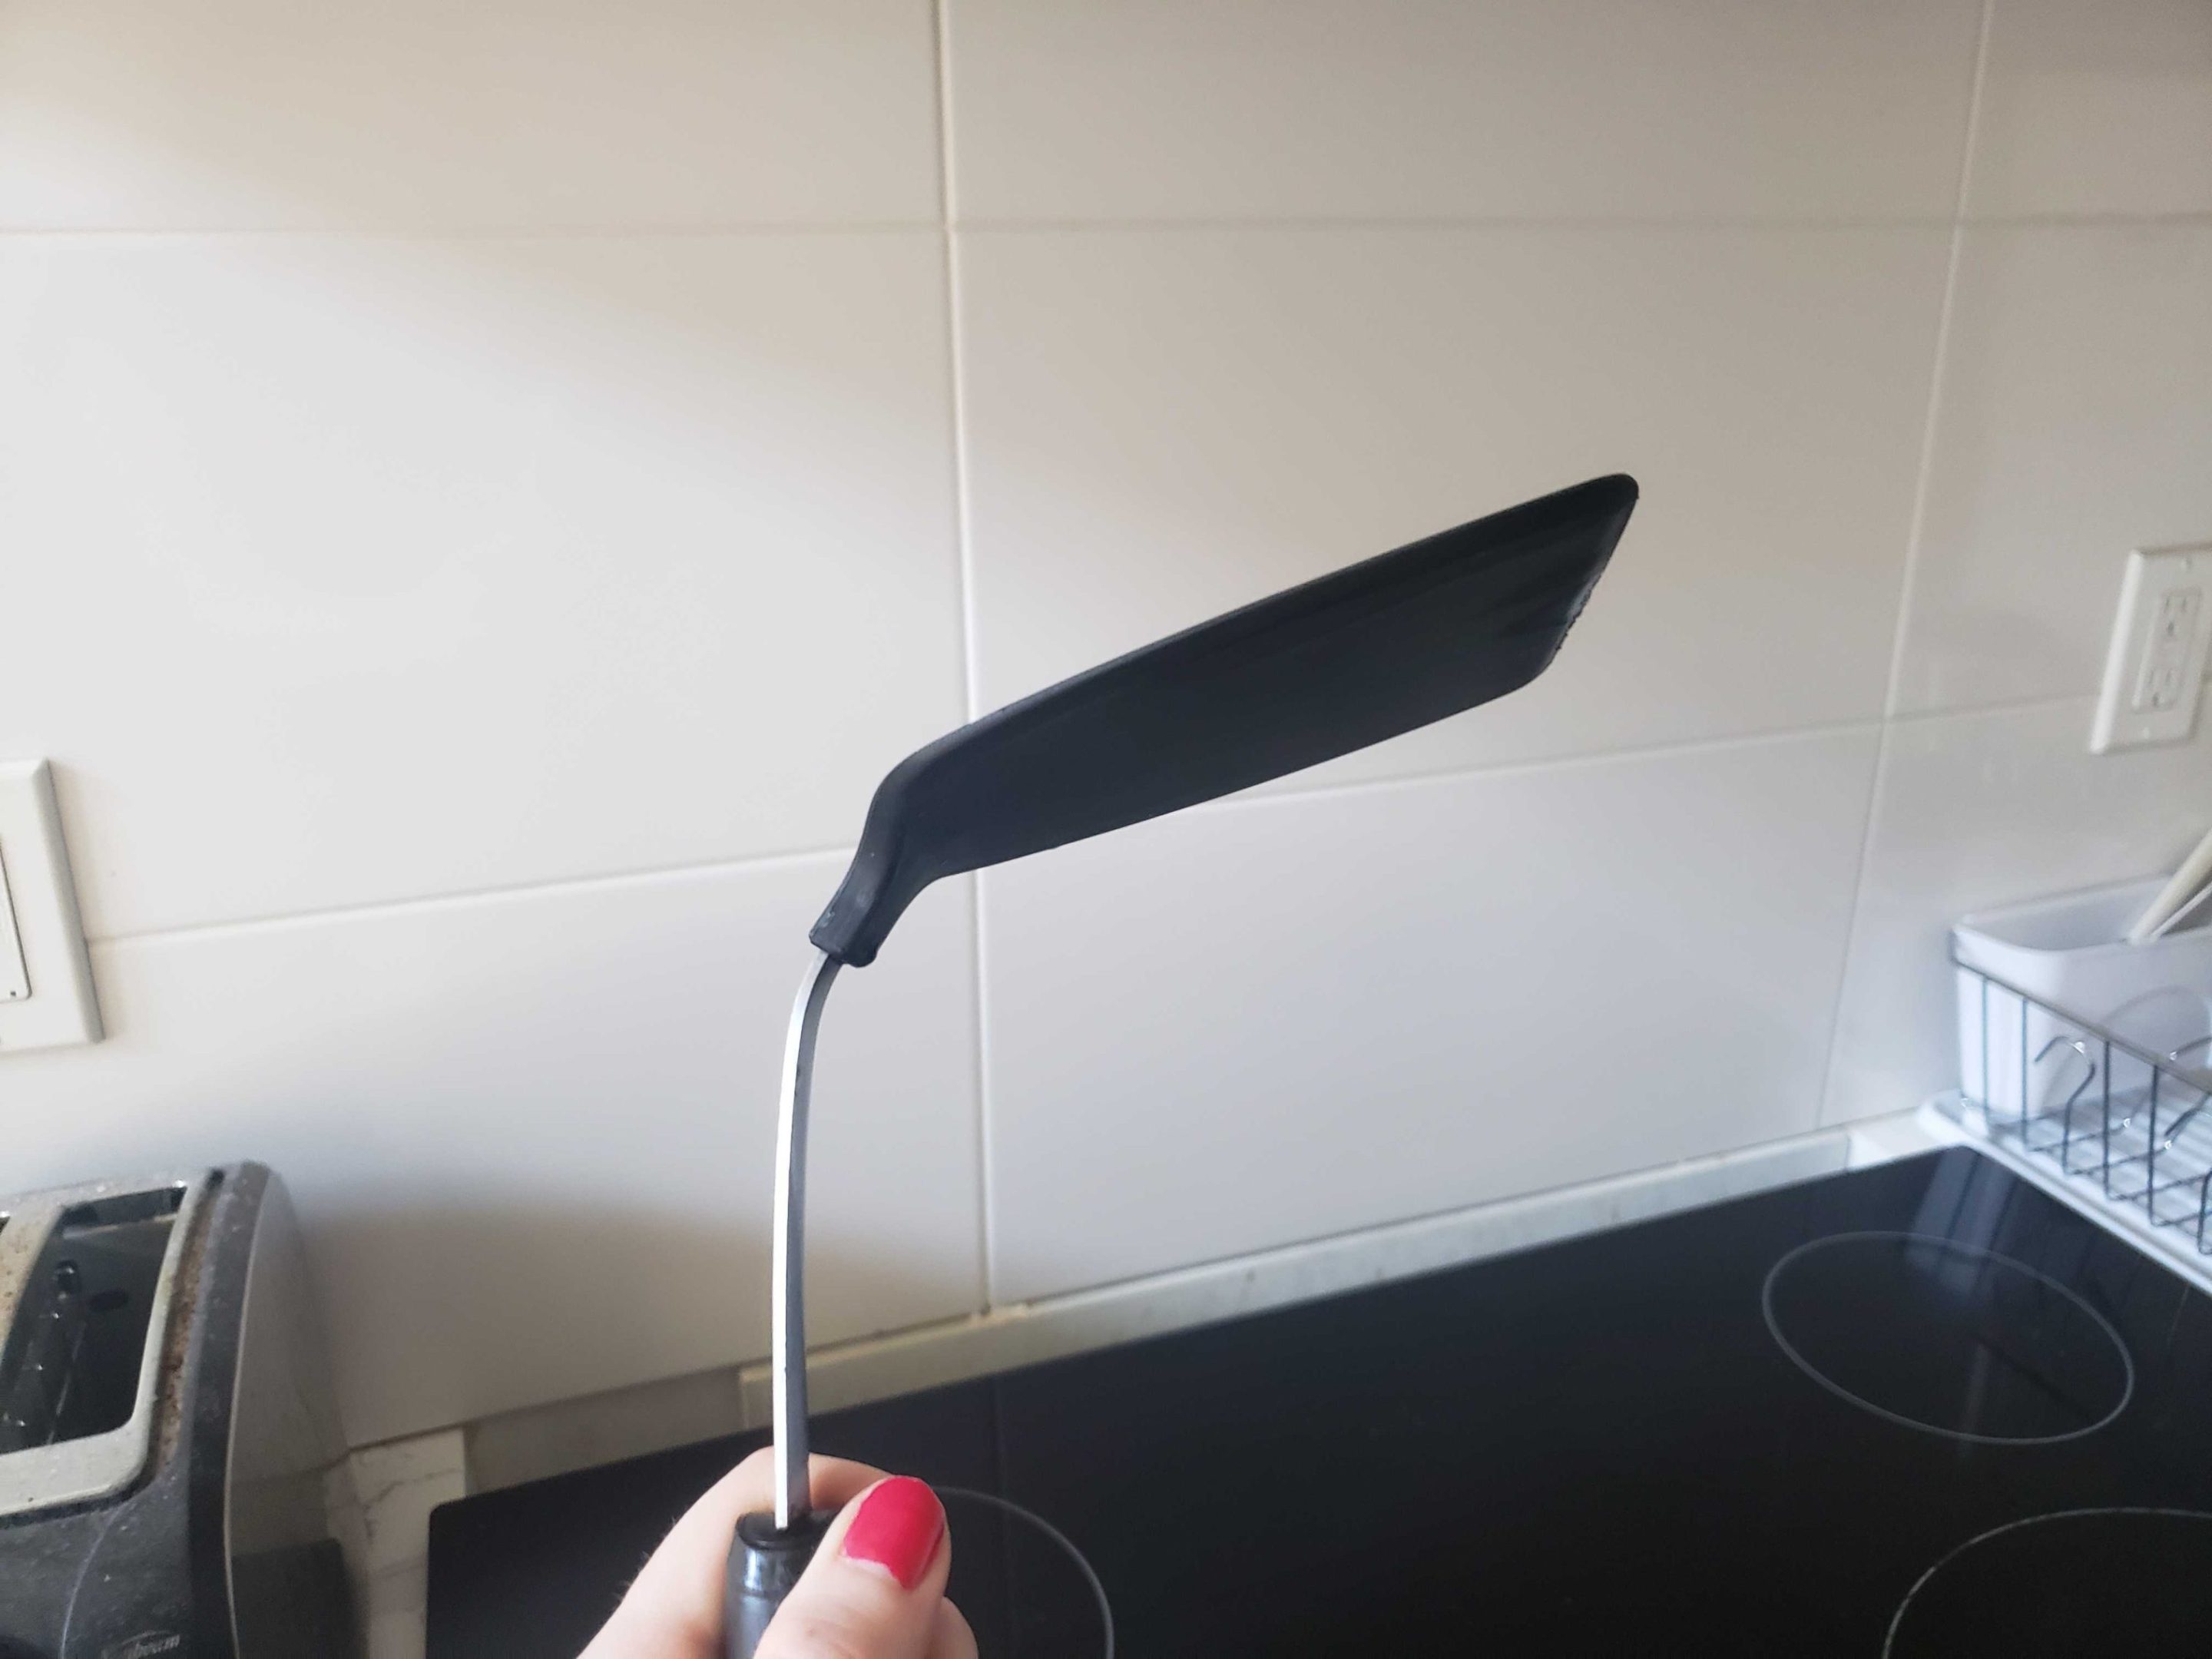 Lauren's spatula, with its shaft bent at an angle